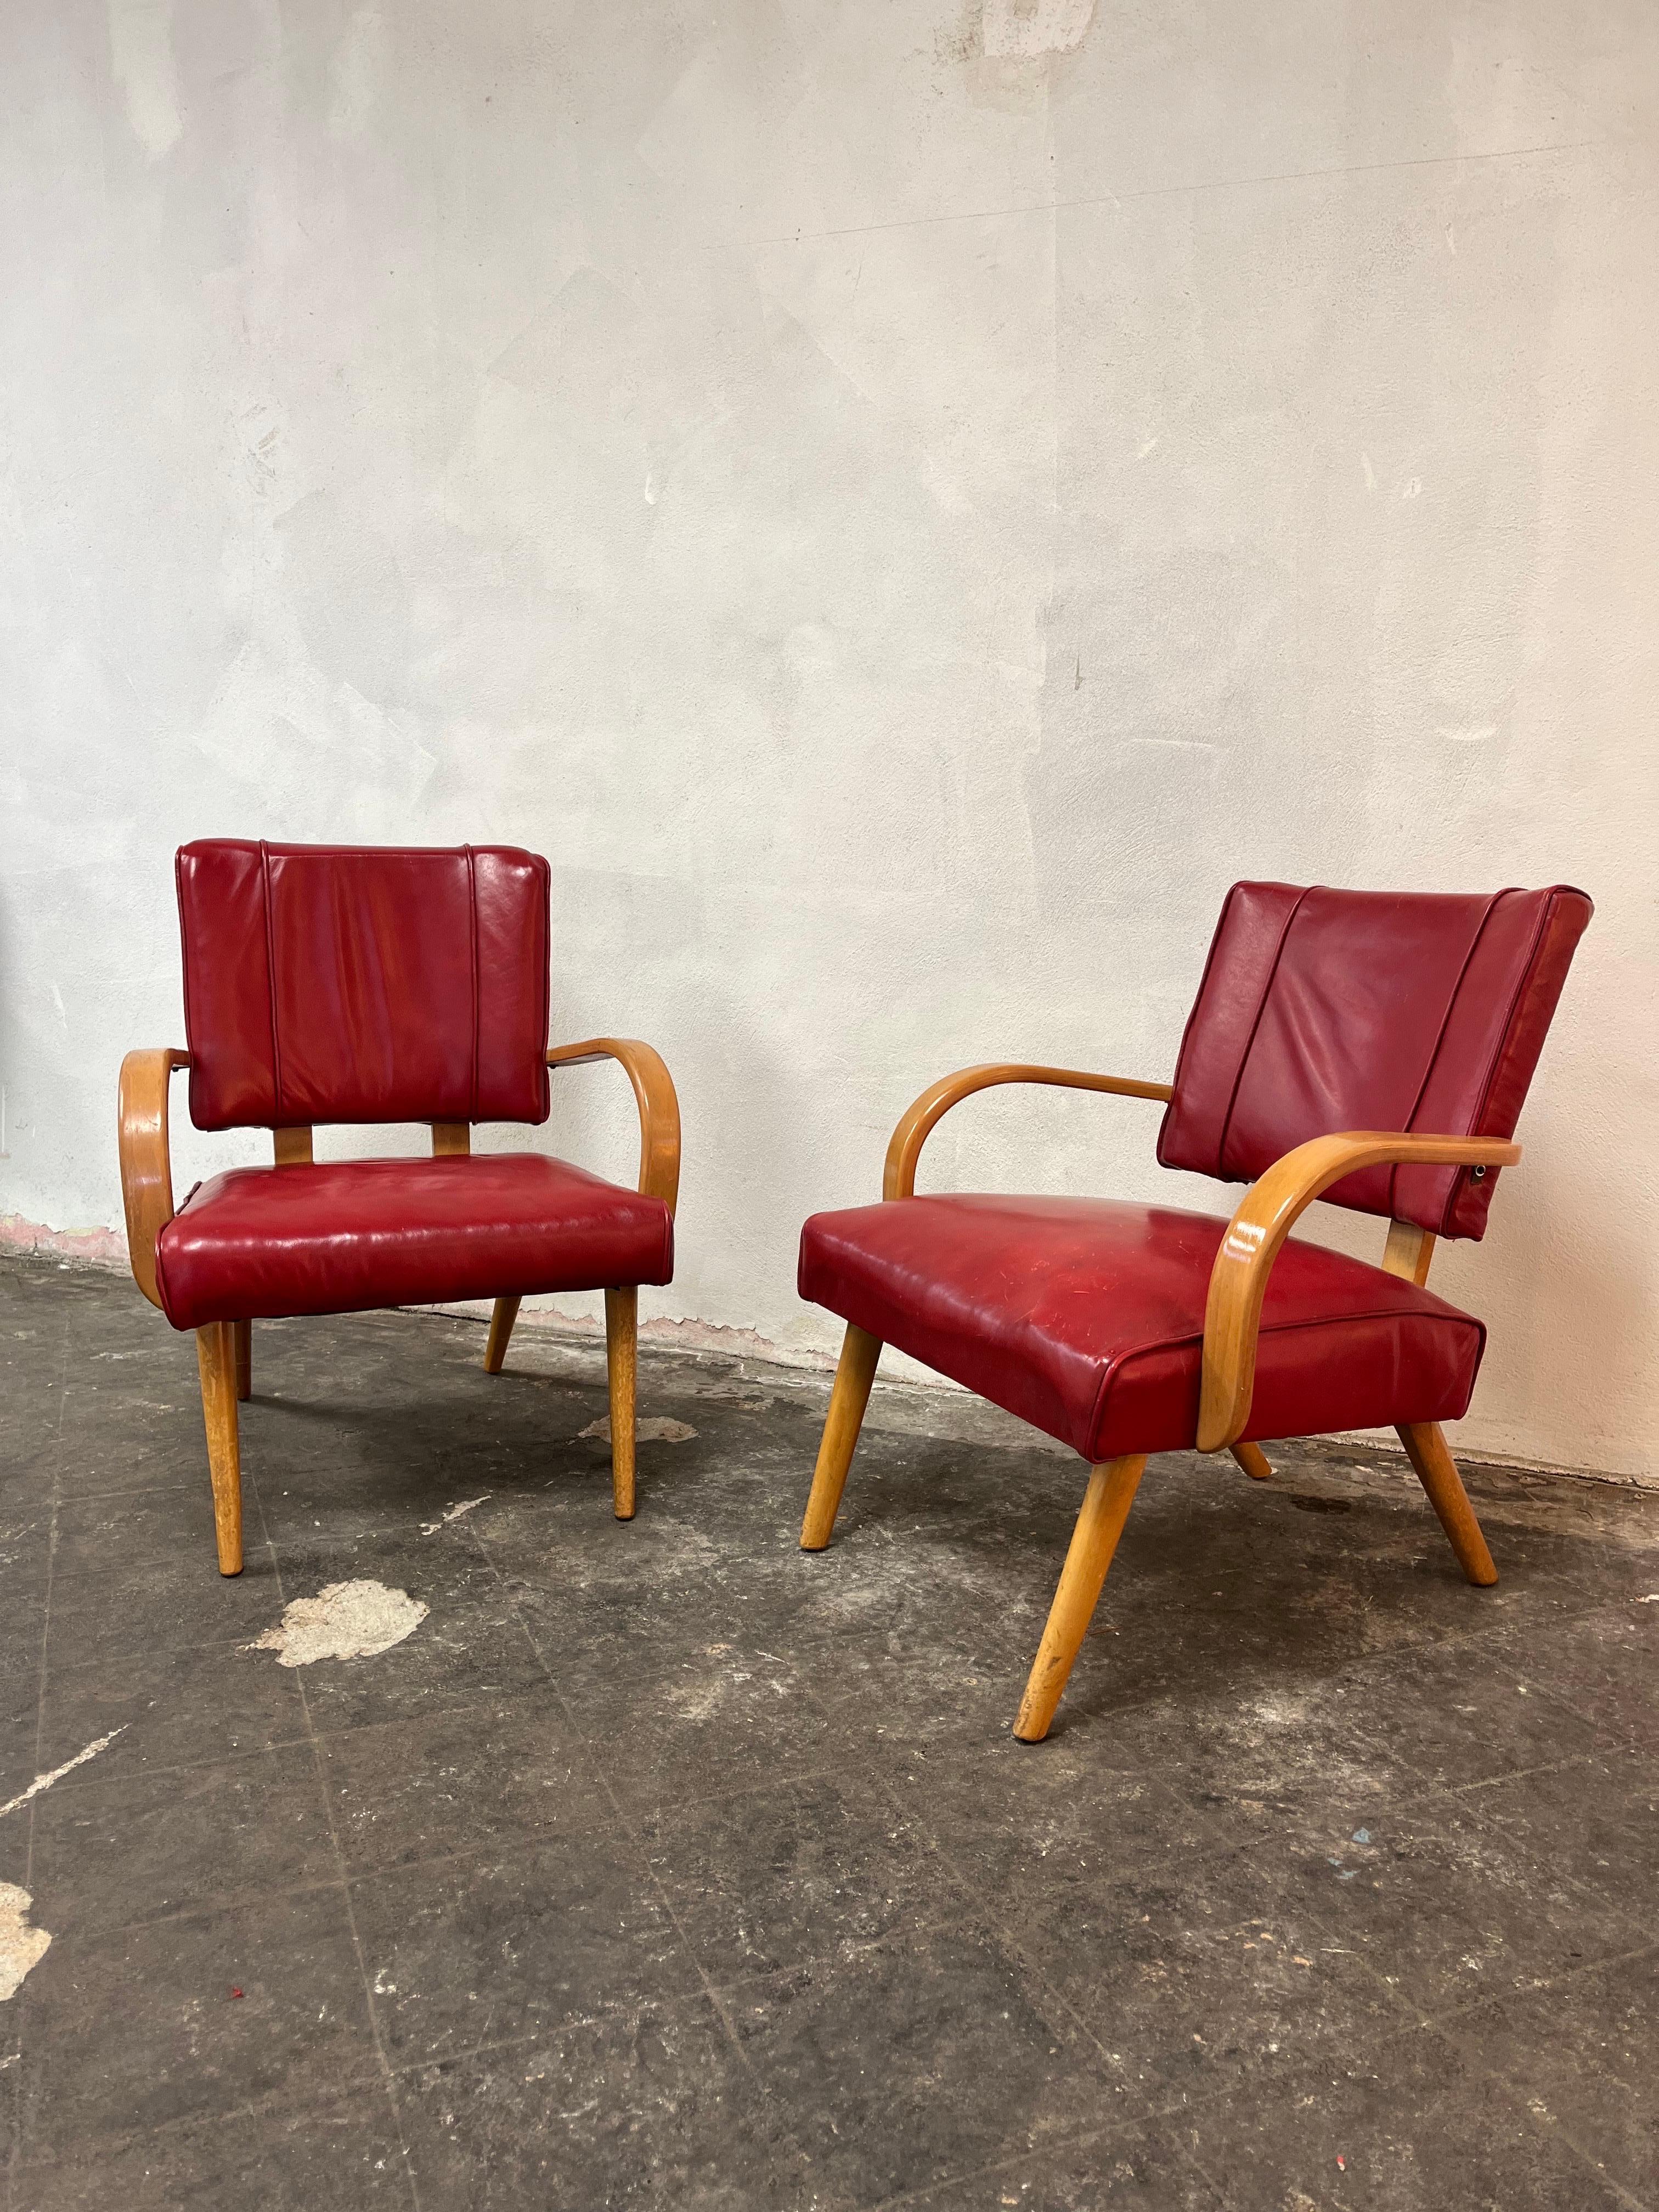 Awesome retro bentwood arm chairs in the style of Thonet and Heywood Wakefield. Nice red leather seating with swooping bent wood arms, and nicely splayed legs. Low profile lending to Atomic Ranch design.
Curbside to NYC/Philly $300